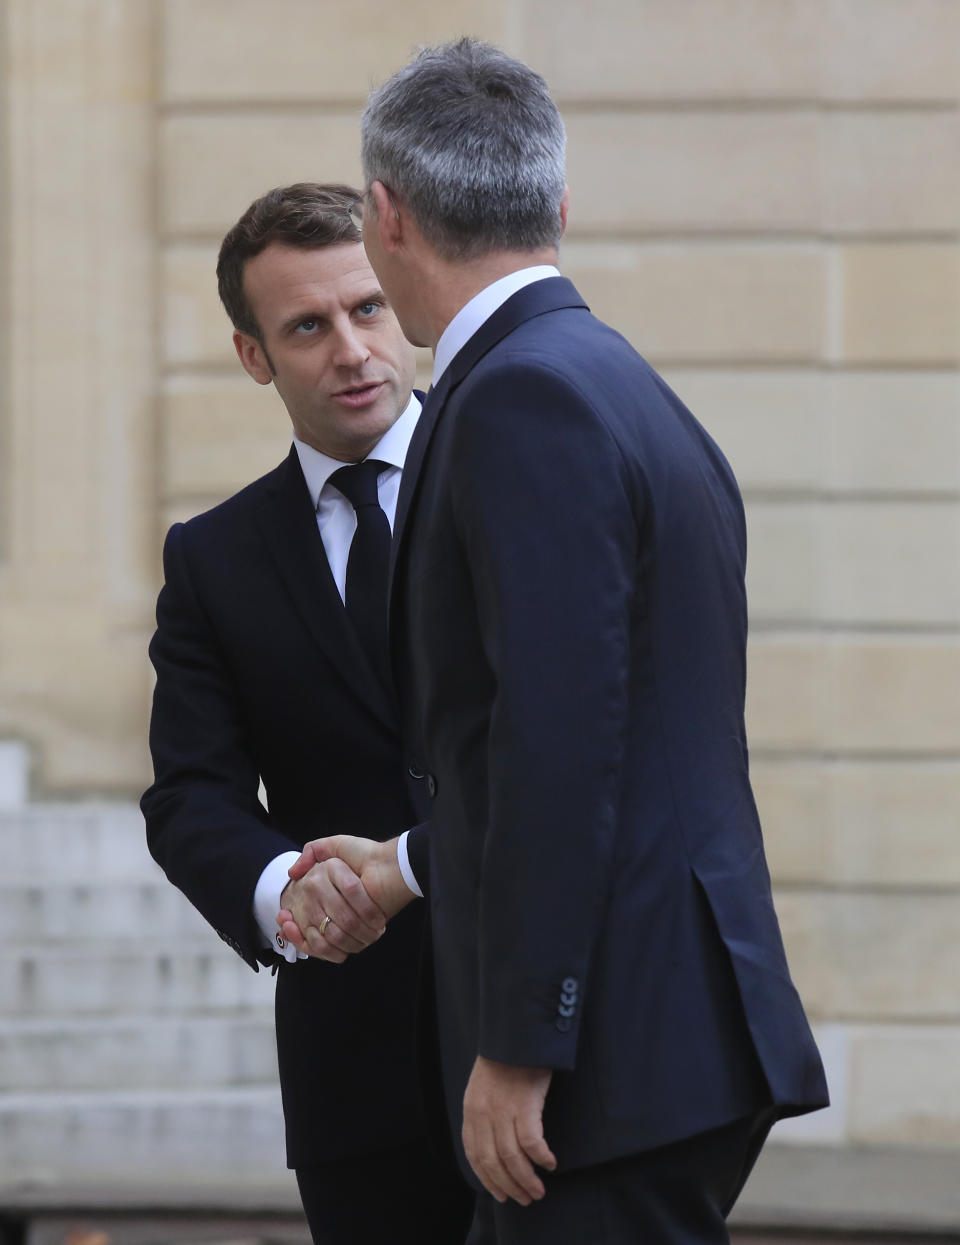 French President Emmanuel Macron, left, welcomes NATO Secretary General Jens Stoltenberg at the Elysee Palace in Paris, Thursday, Nov. 28, 2019. NATO chief Jens Stoltenberg is to meet in Paris with French President Emmanuel Macron, whose recent public statement that it is "brain dead" has shaken the military alliance. (AP Photo/Michel Euler)